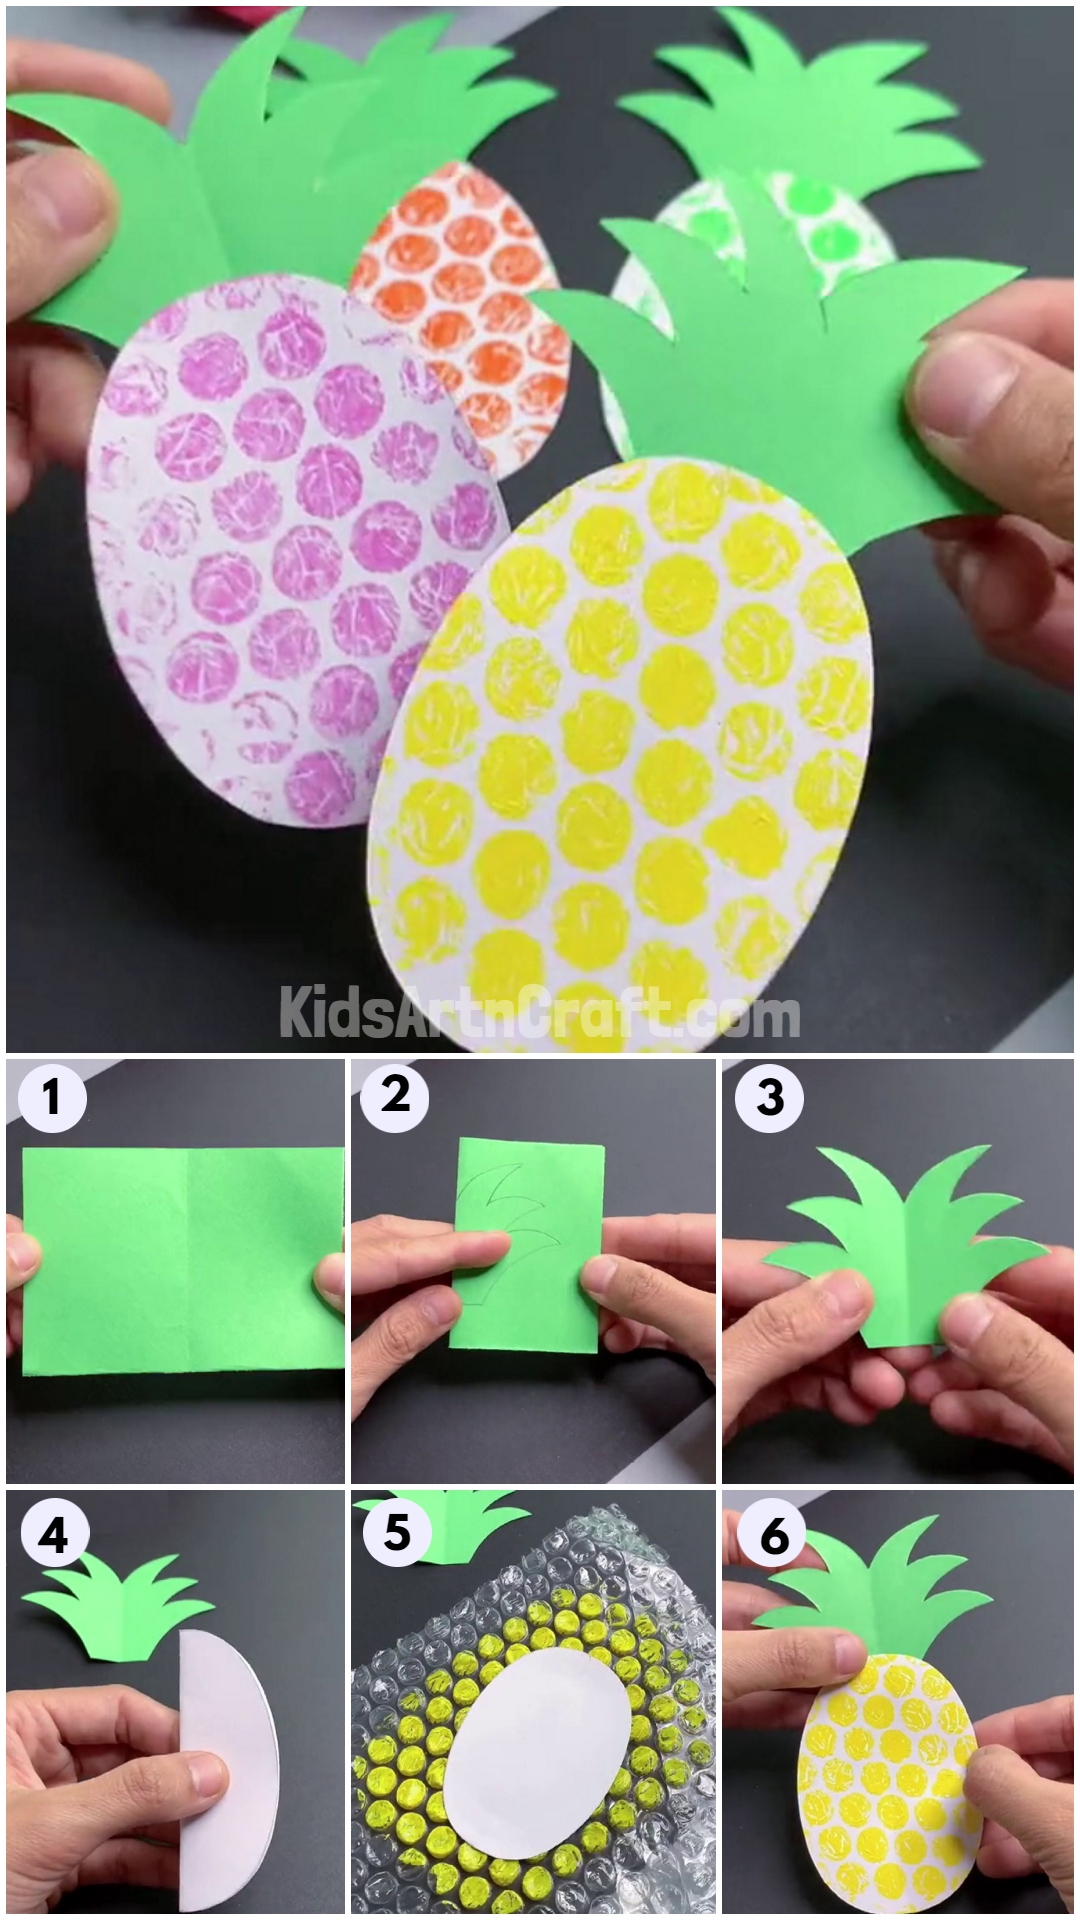 Bubble Wrap Painted Pineapple Craft Step by Step Tutorial